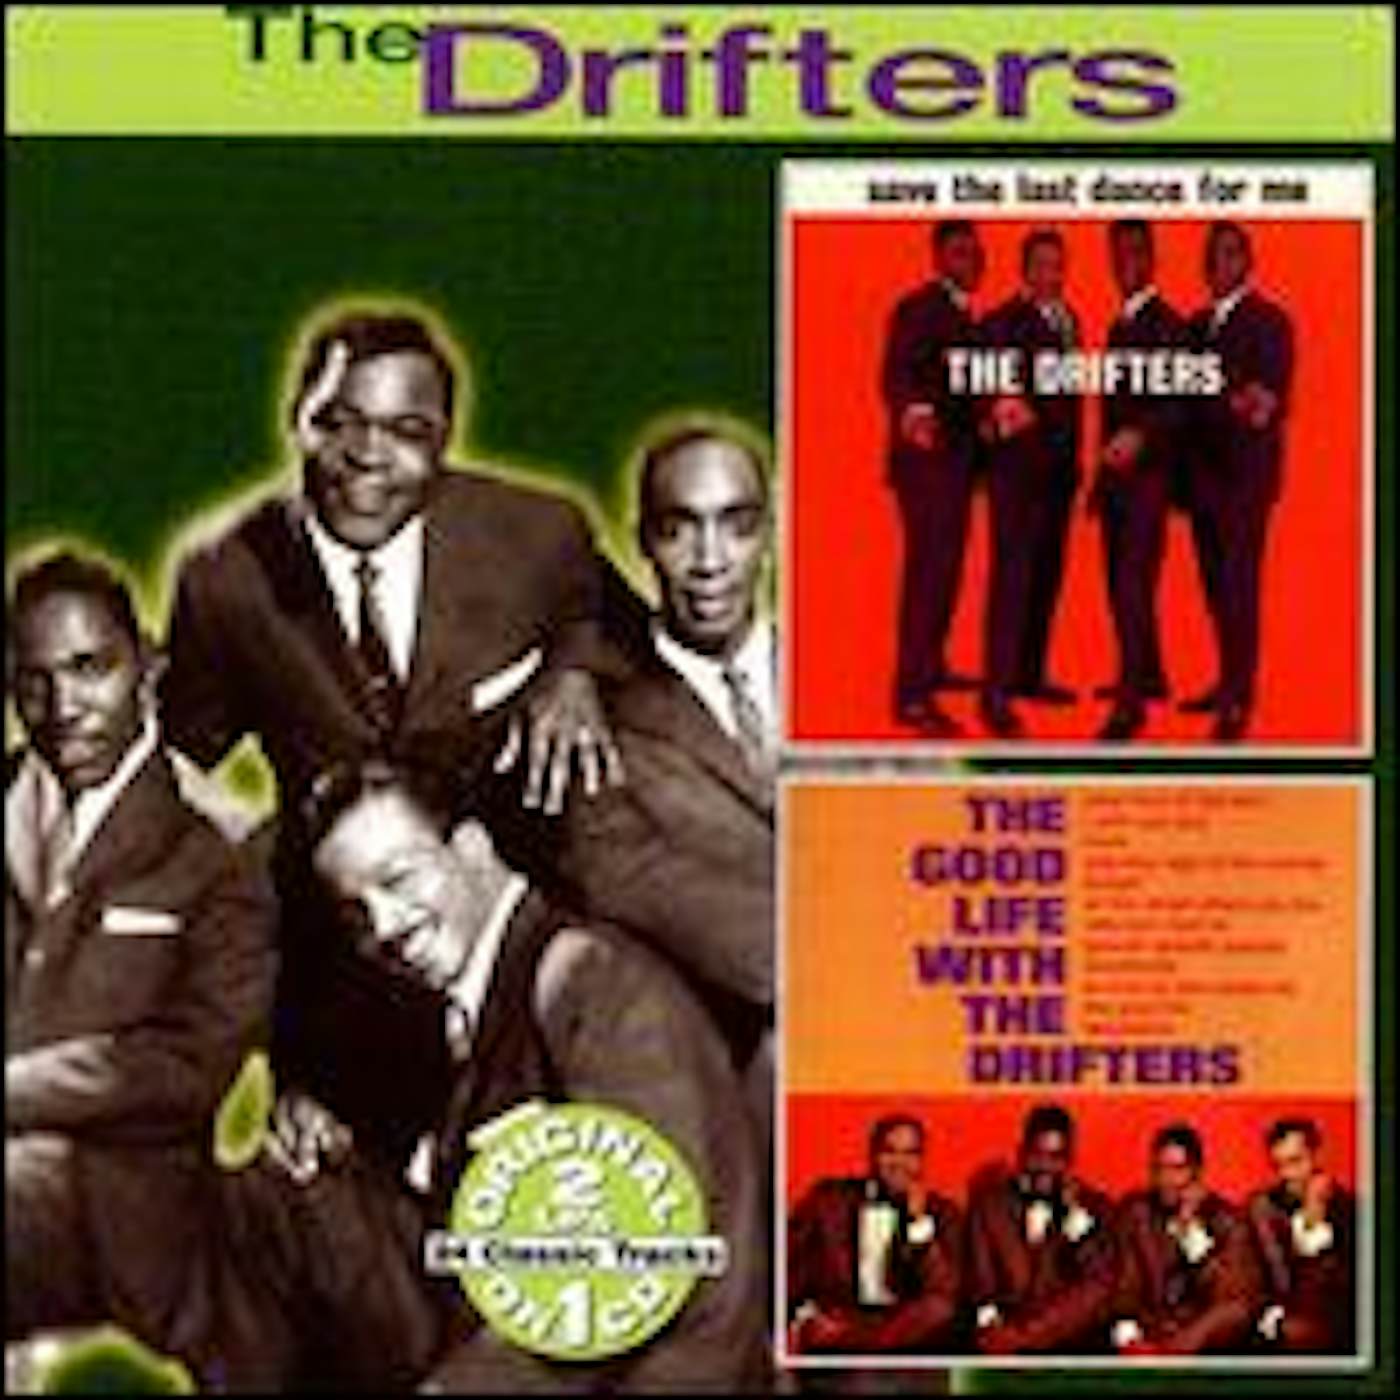 The Drifters SAVE THE LAST DANCE FOR ME: GOOD LIFE WITH DRIFTER CD